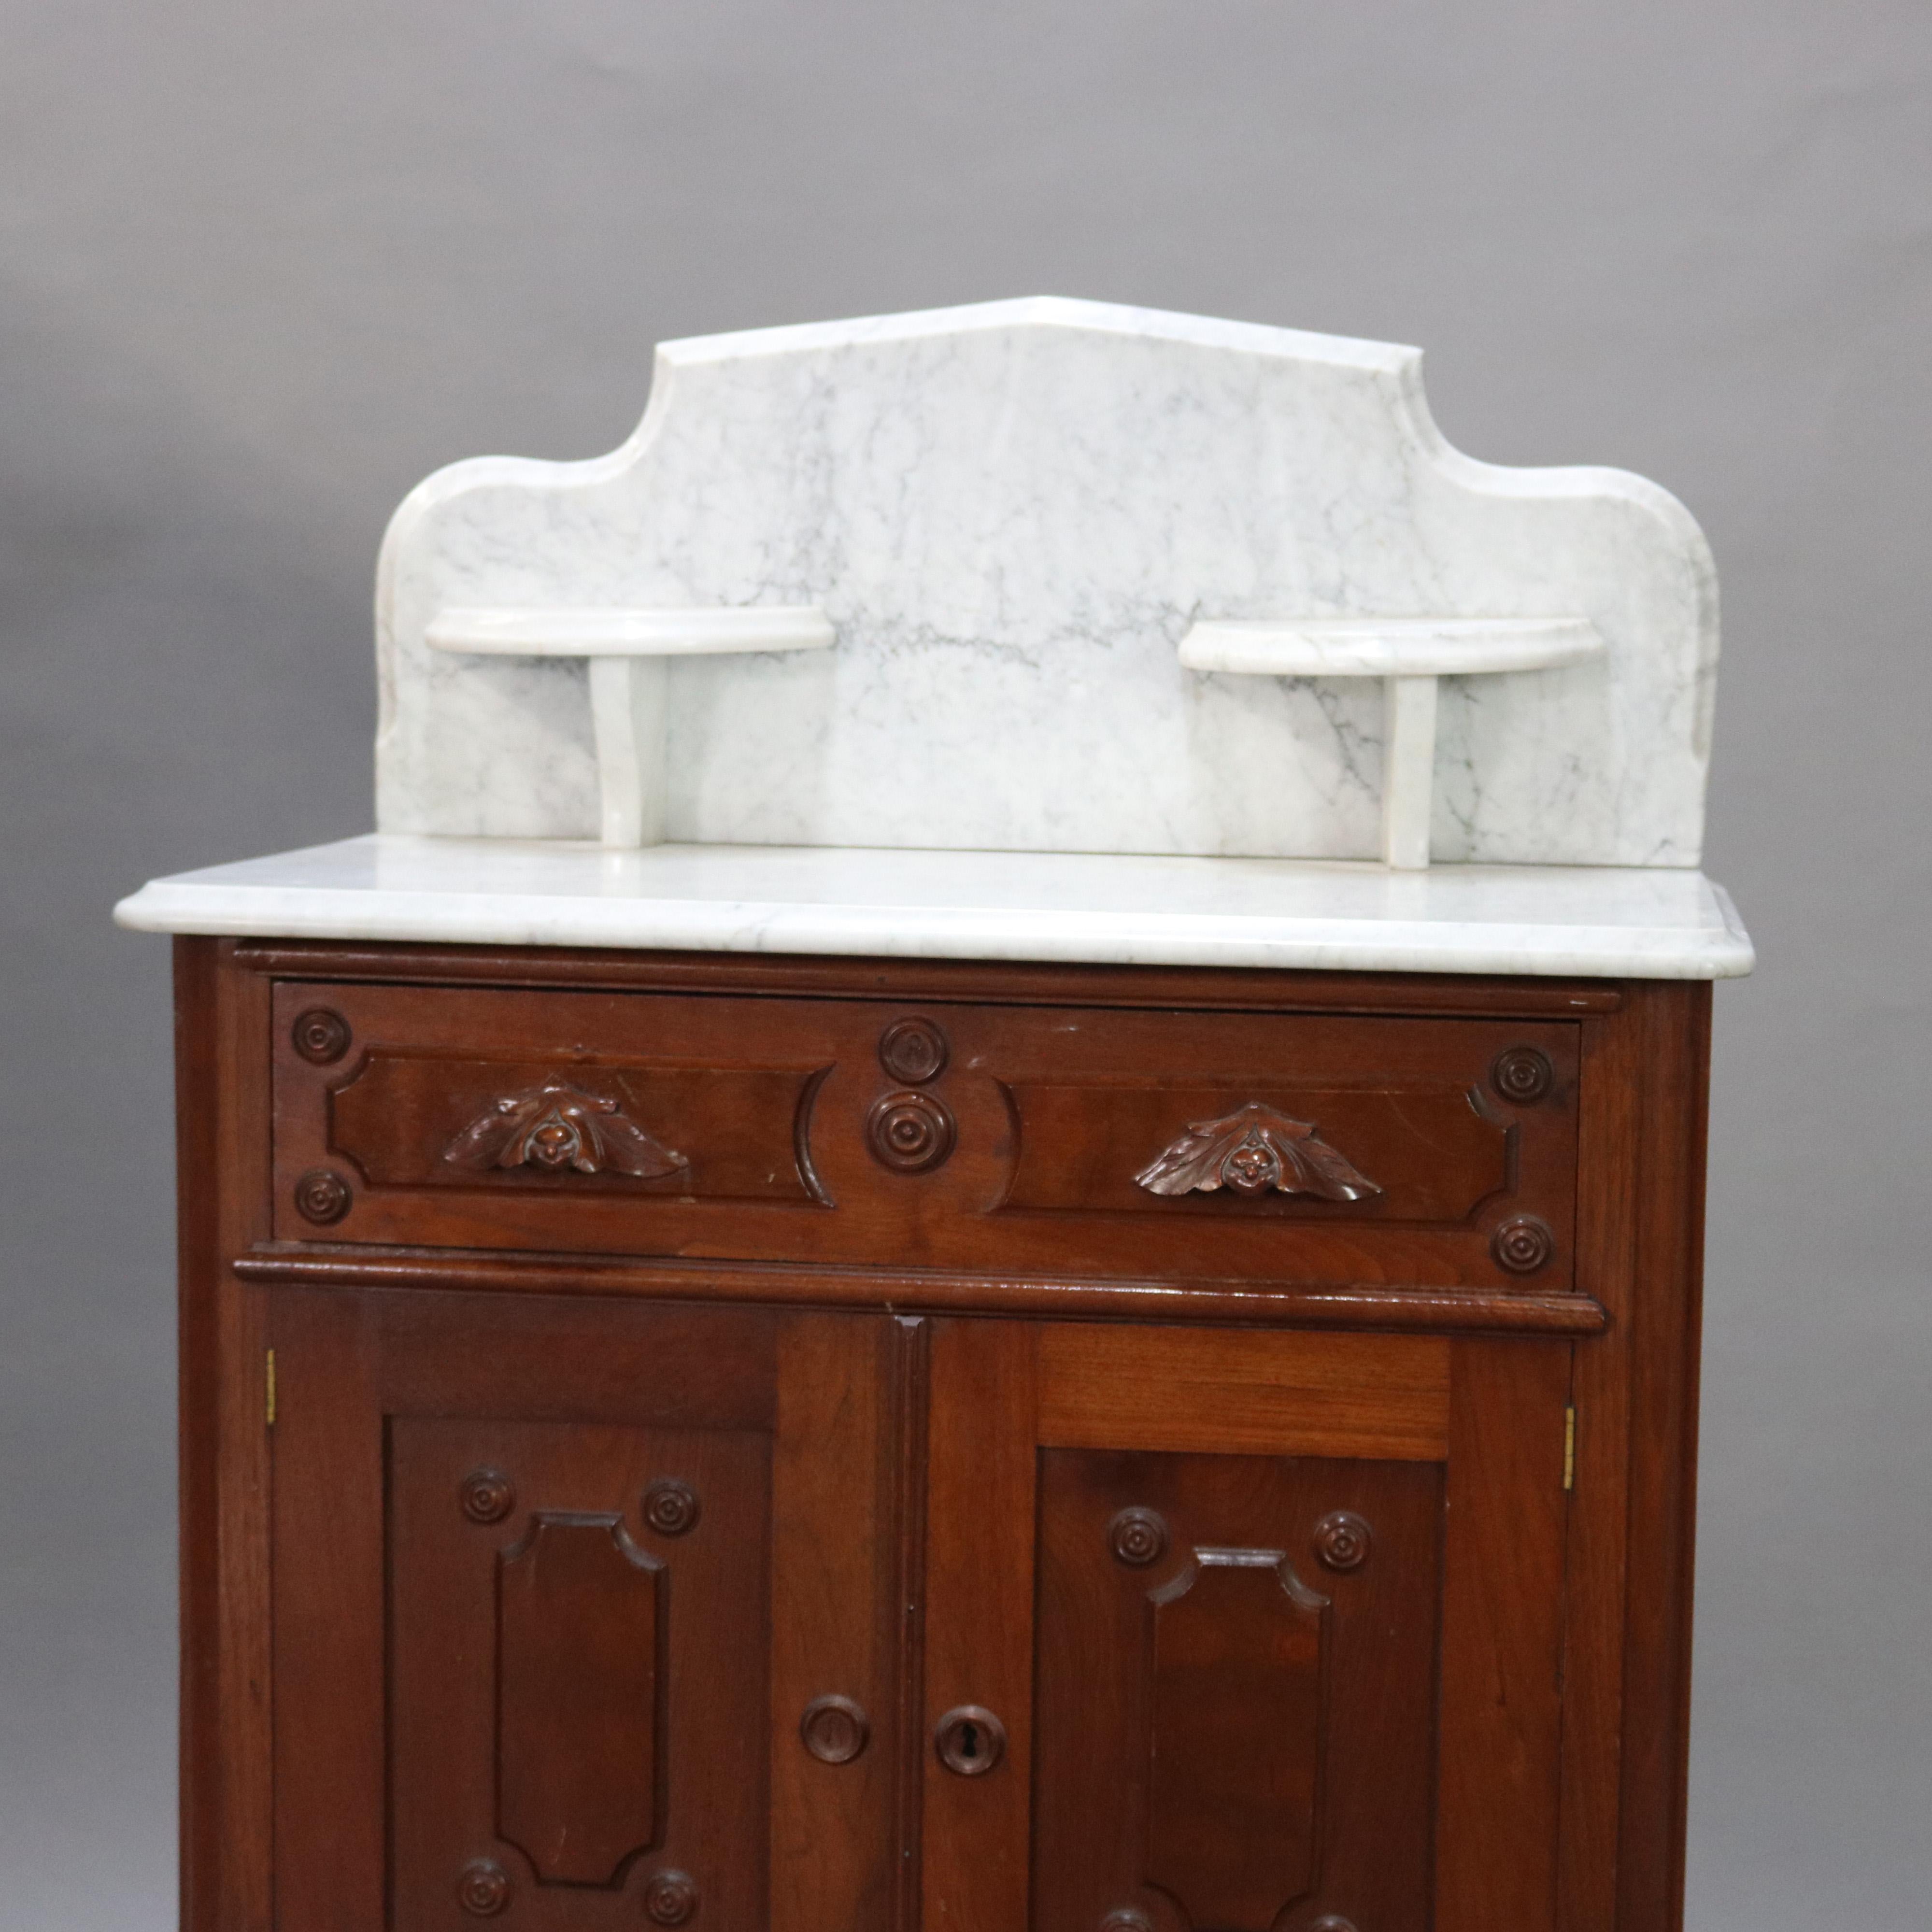 An antique Victorian washstand commode offers shaped and beveled backsplash with flanking candle stands over walnut base with paneled frieze drawer having foliate carved handles over a double paneled door lower cabinet, raised on casters, circa